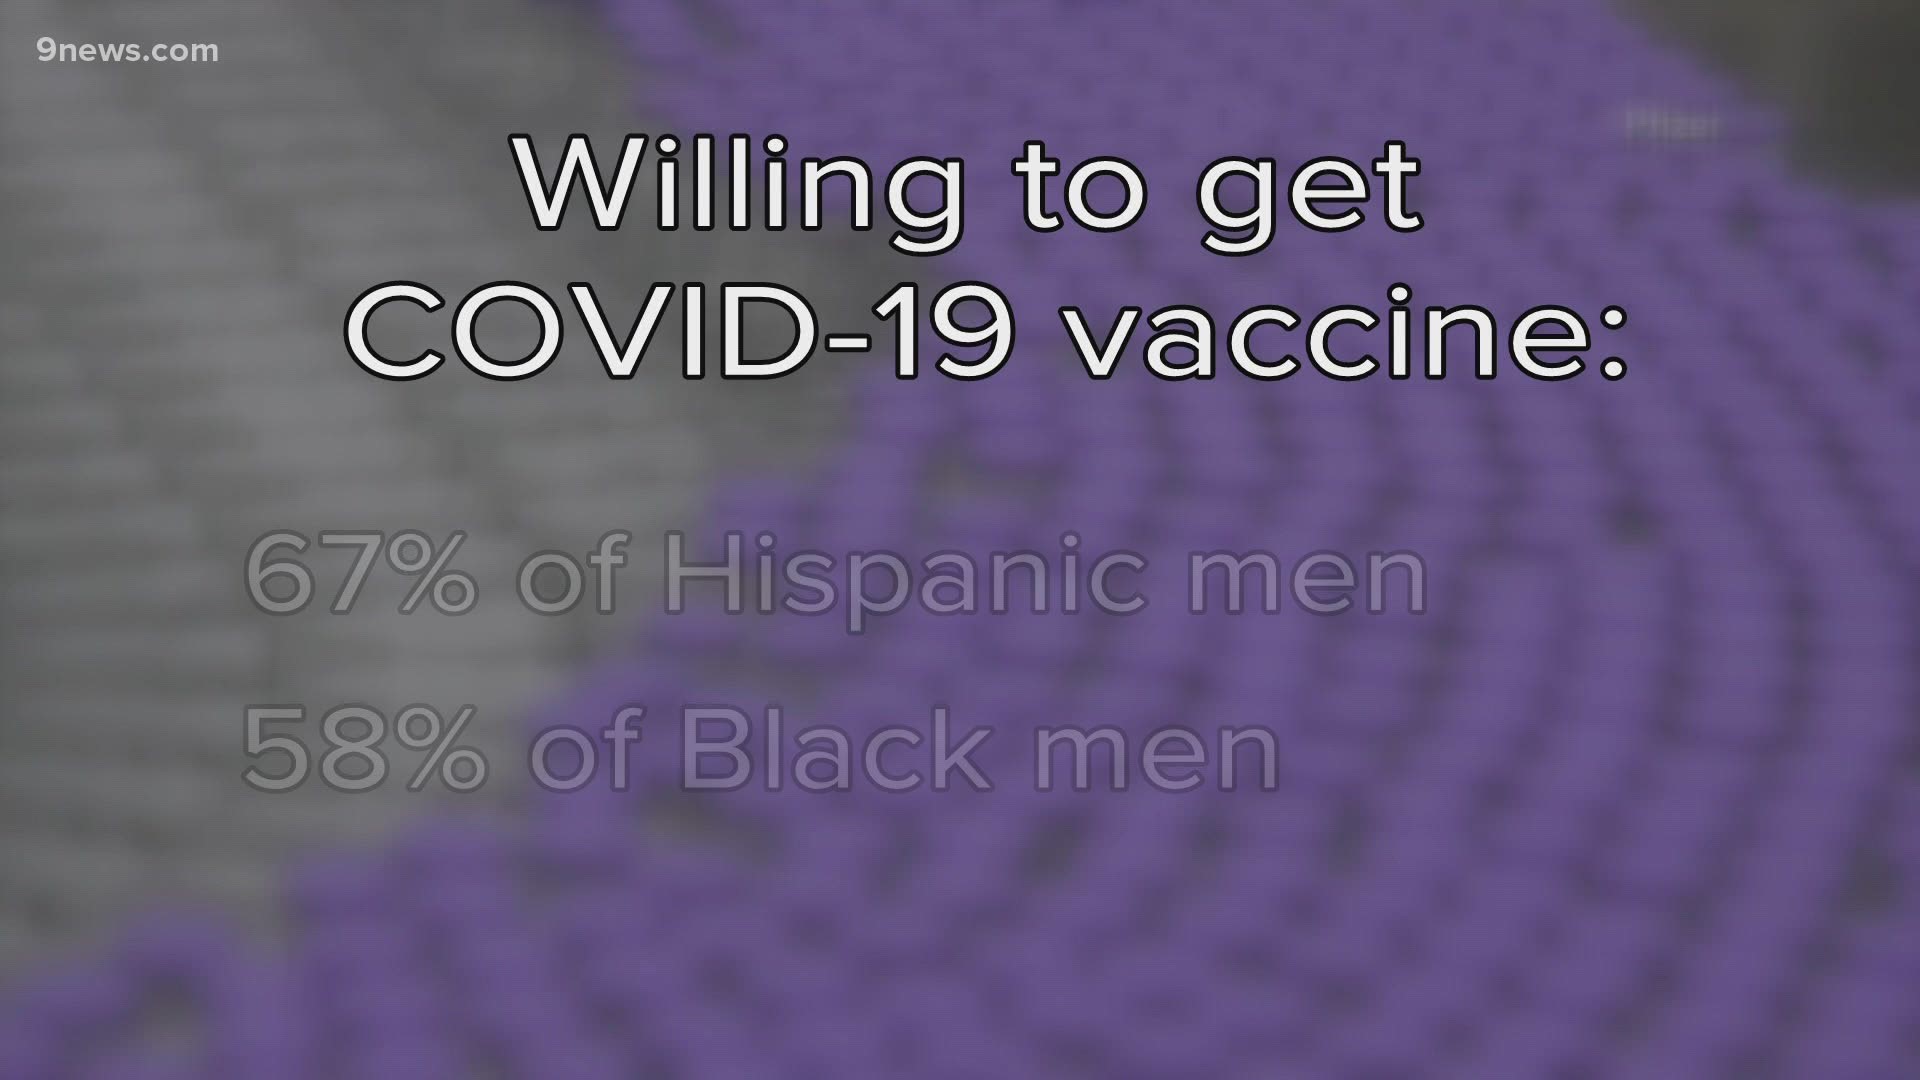 COVID-19 disproportionately impacts communities of color. Those same communities are often targeted with misinformation about vaccines, the task force says.